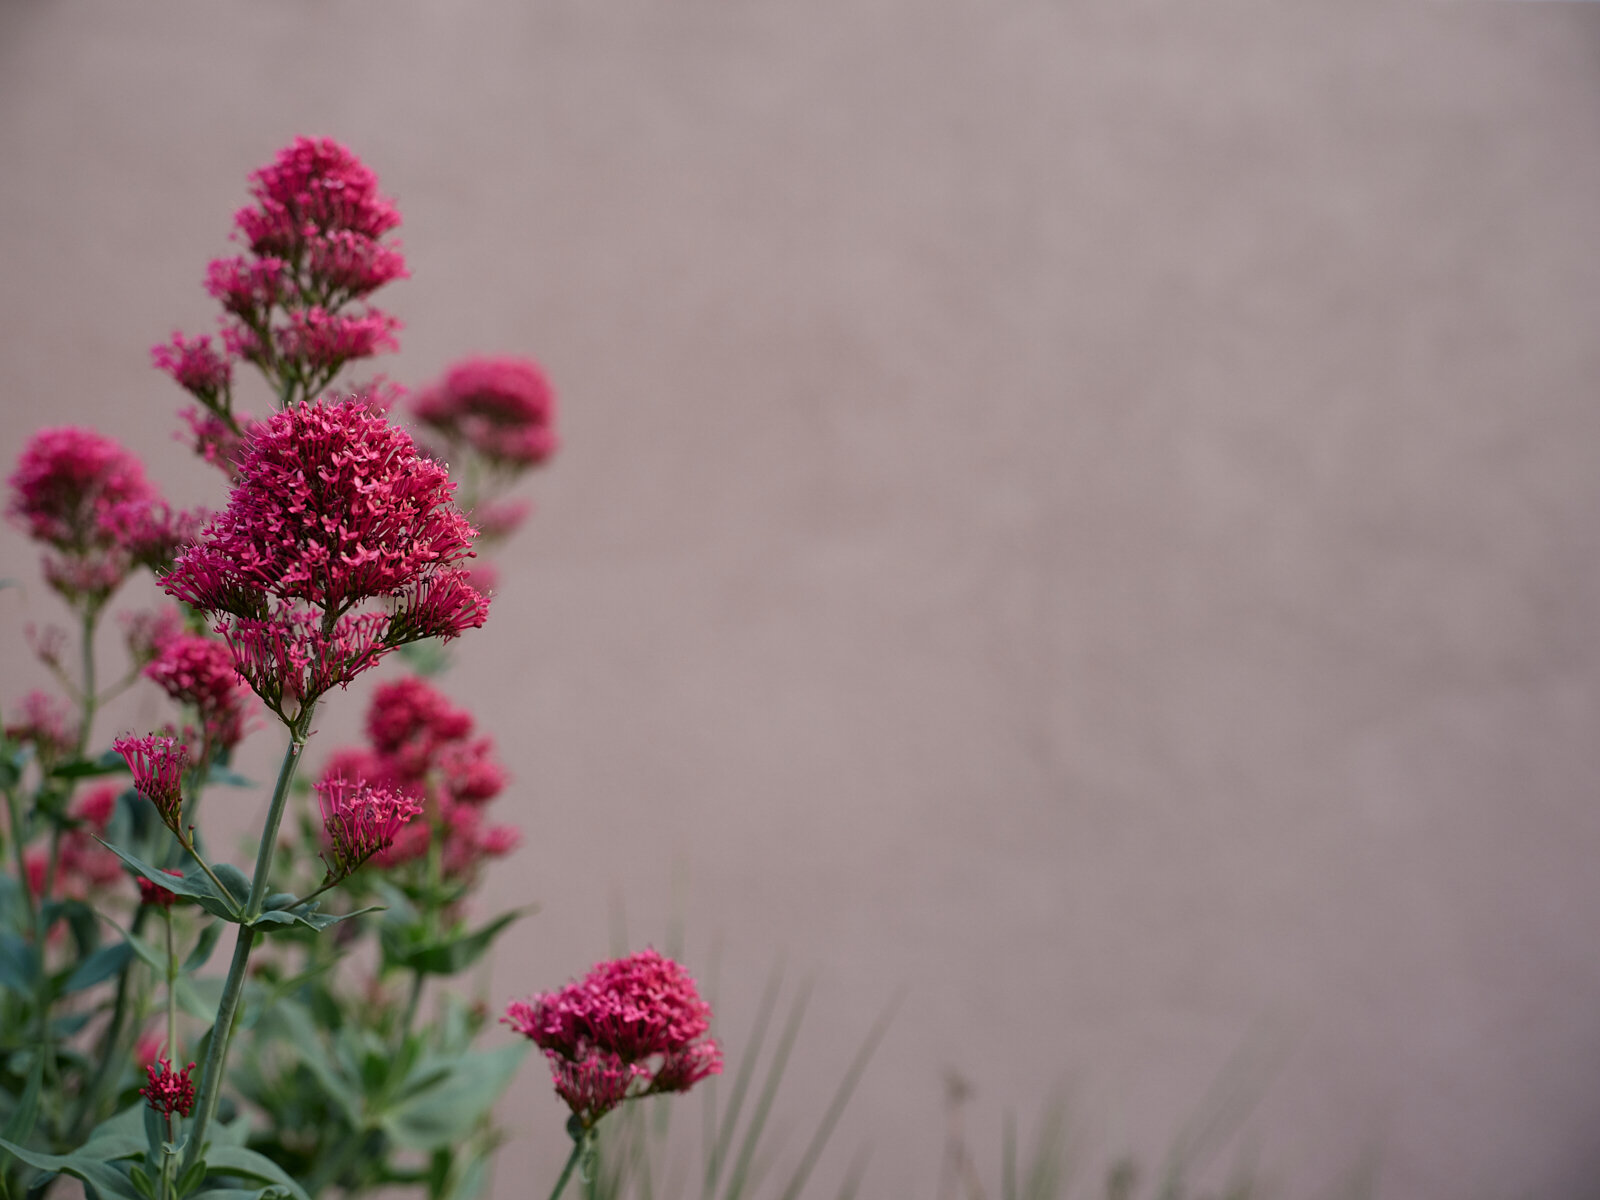   Valerian and Pink Wall, Alexandra, Central Otago. 2020. 330 x 250mm  